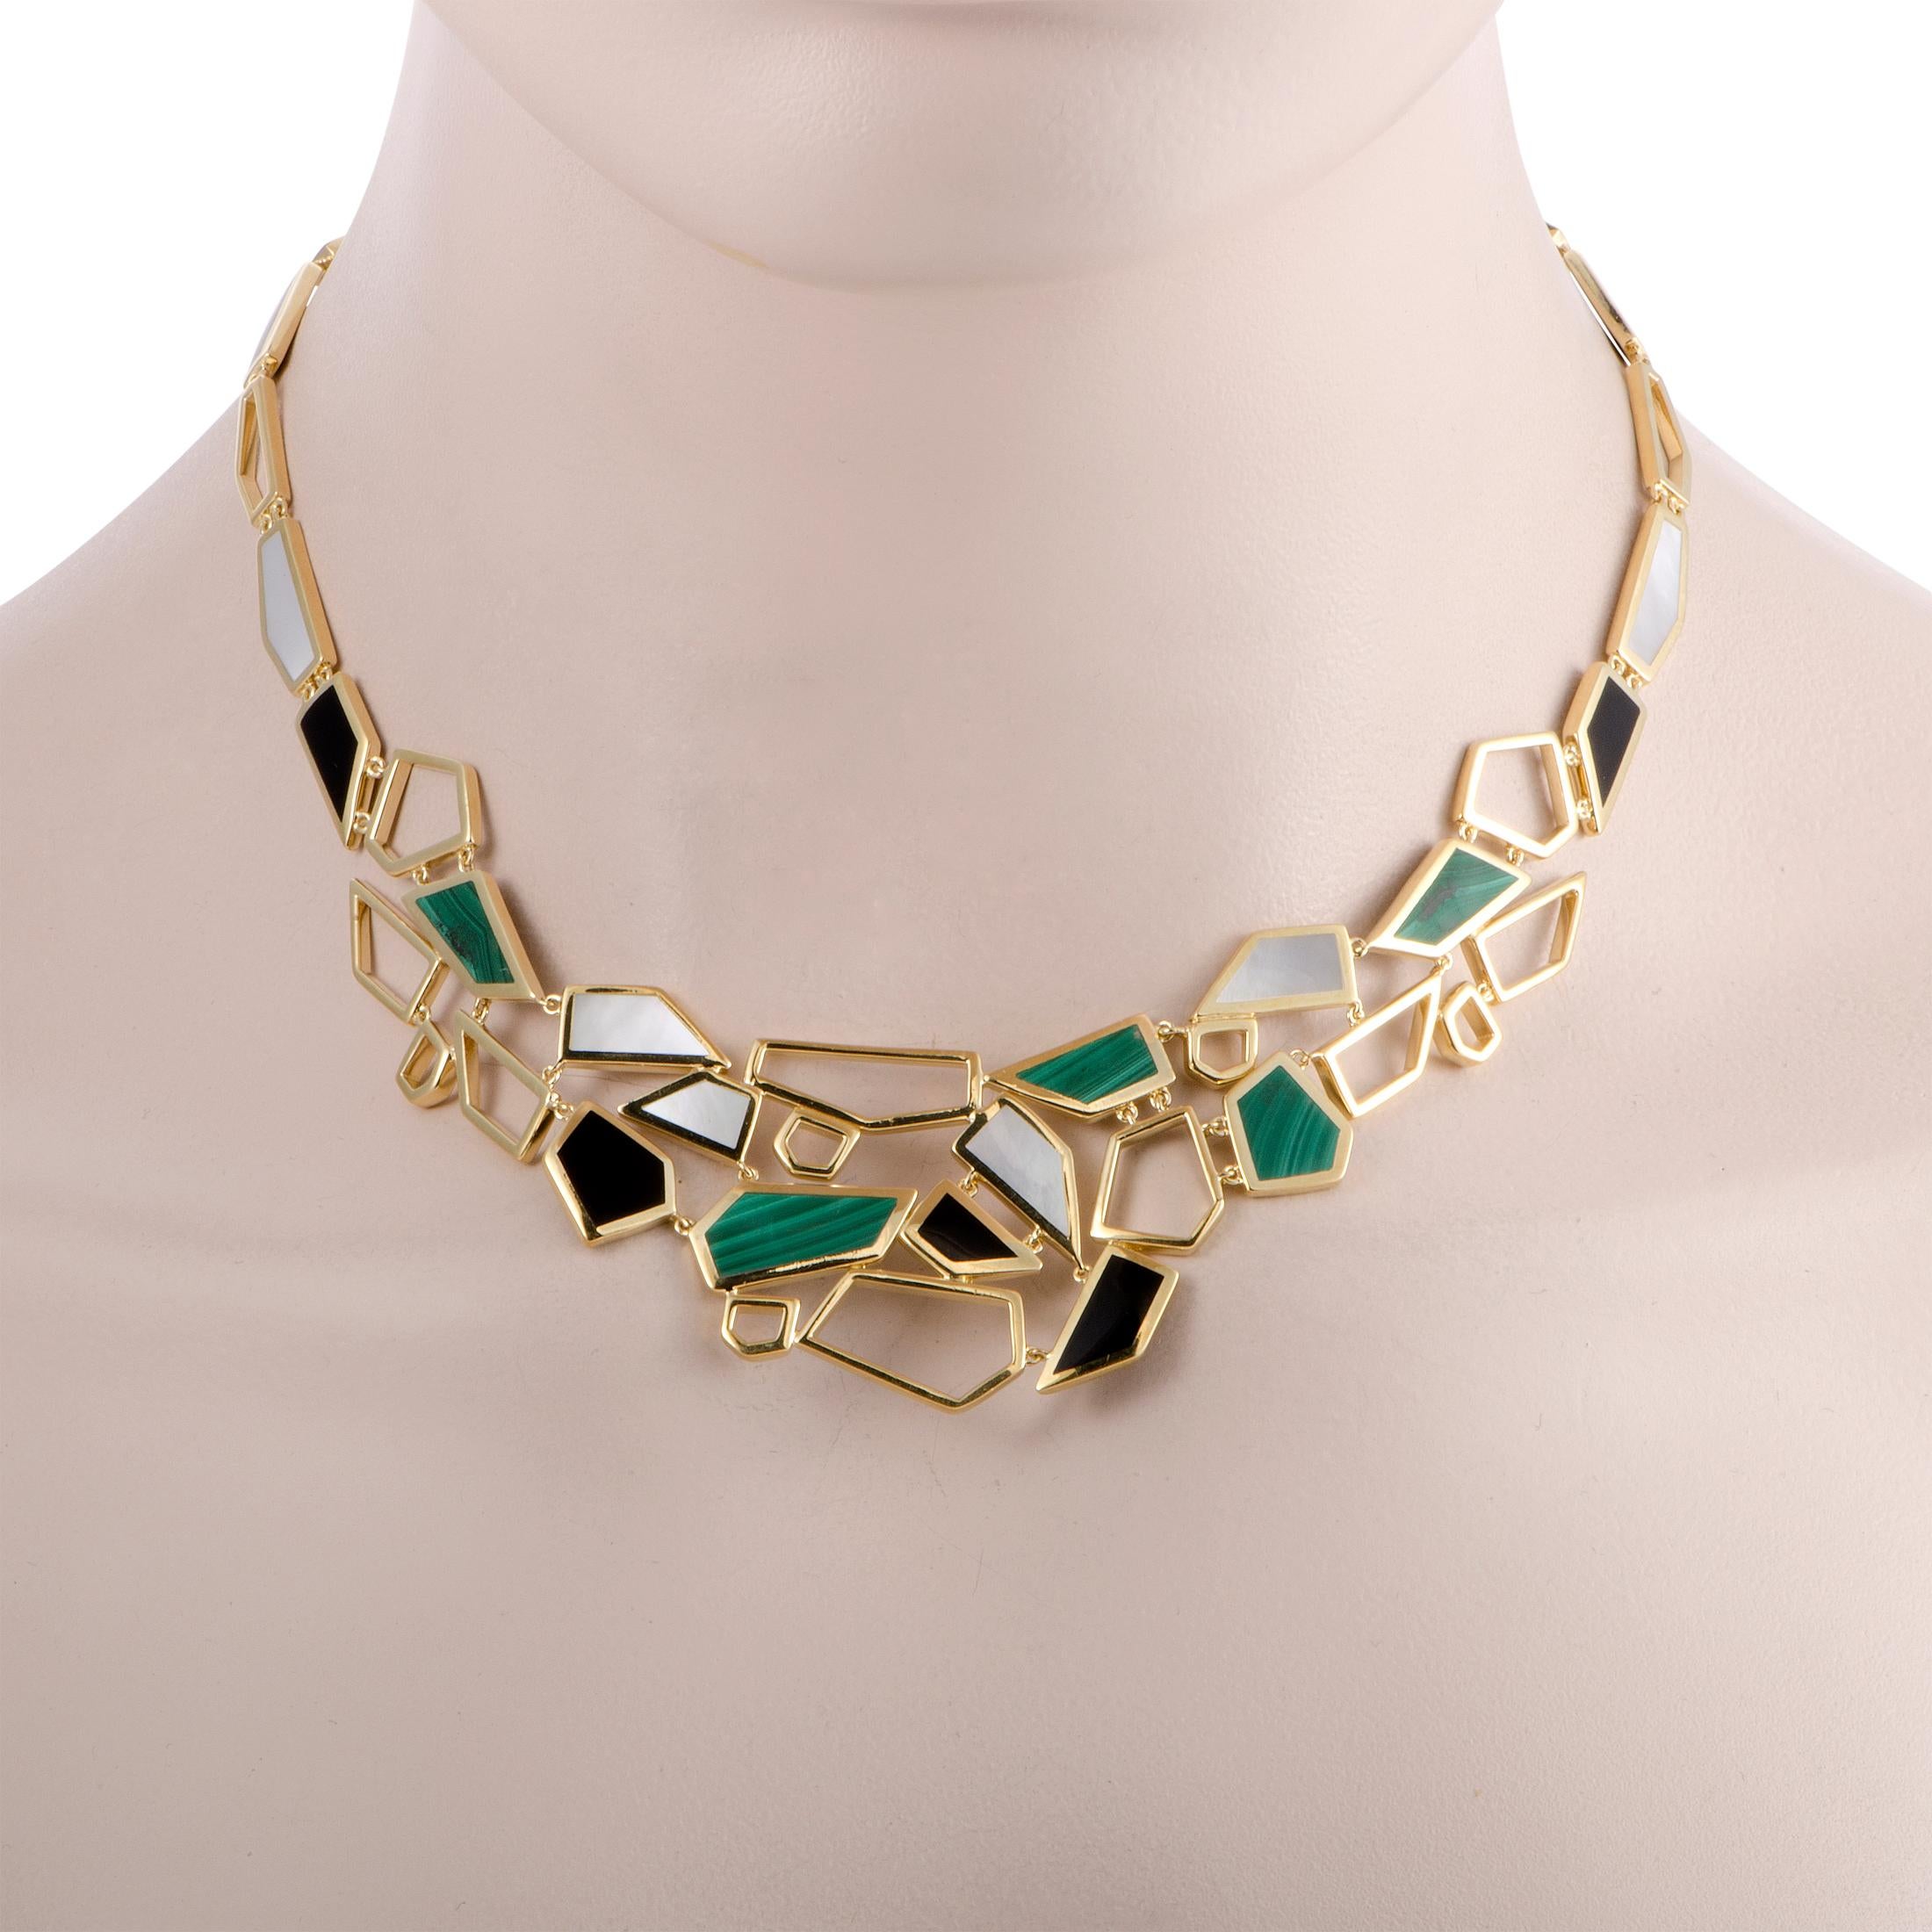 The captivating black, alluring green and sublime mother of pearl nuances of the diversely cut gems produce an eye-catching effect in this exquisite necklace from Ippolita. Designed for the exemplary “Rock Candy” collection, the necklace is made of